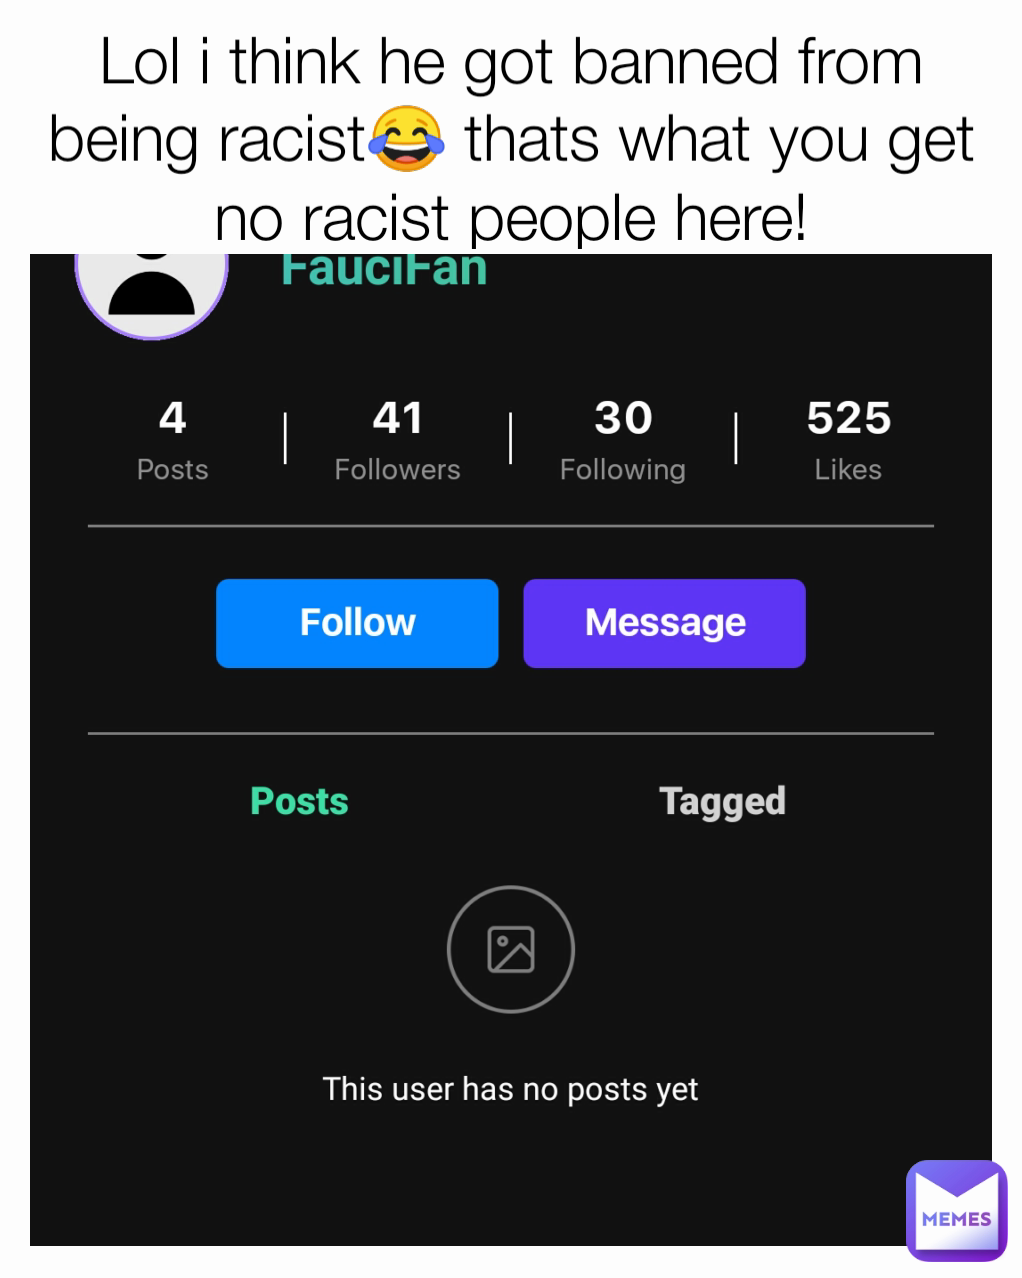 Lol i think he got banned from being racist😂 thats what you get no racist people here!